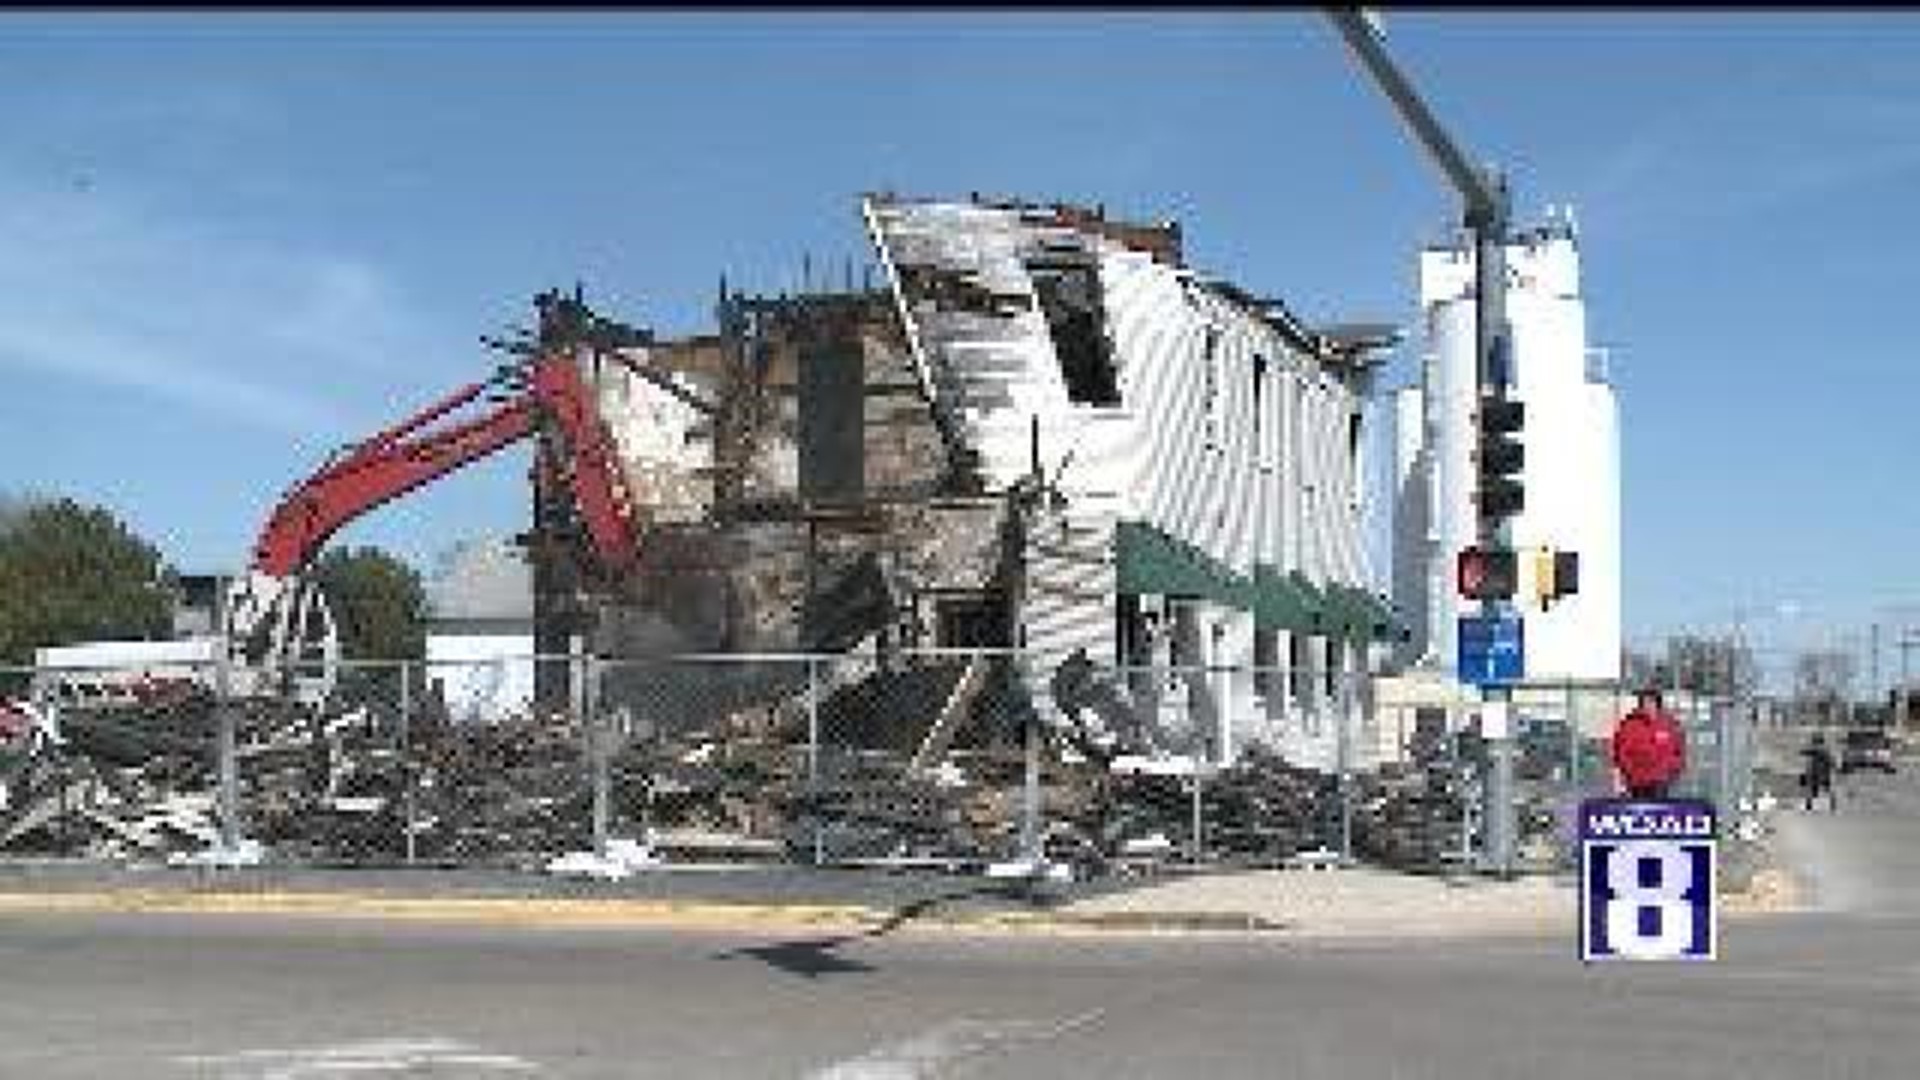 Del's Eatery and Pub Demolished